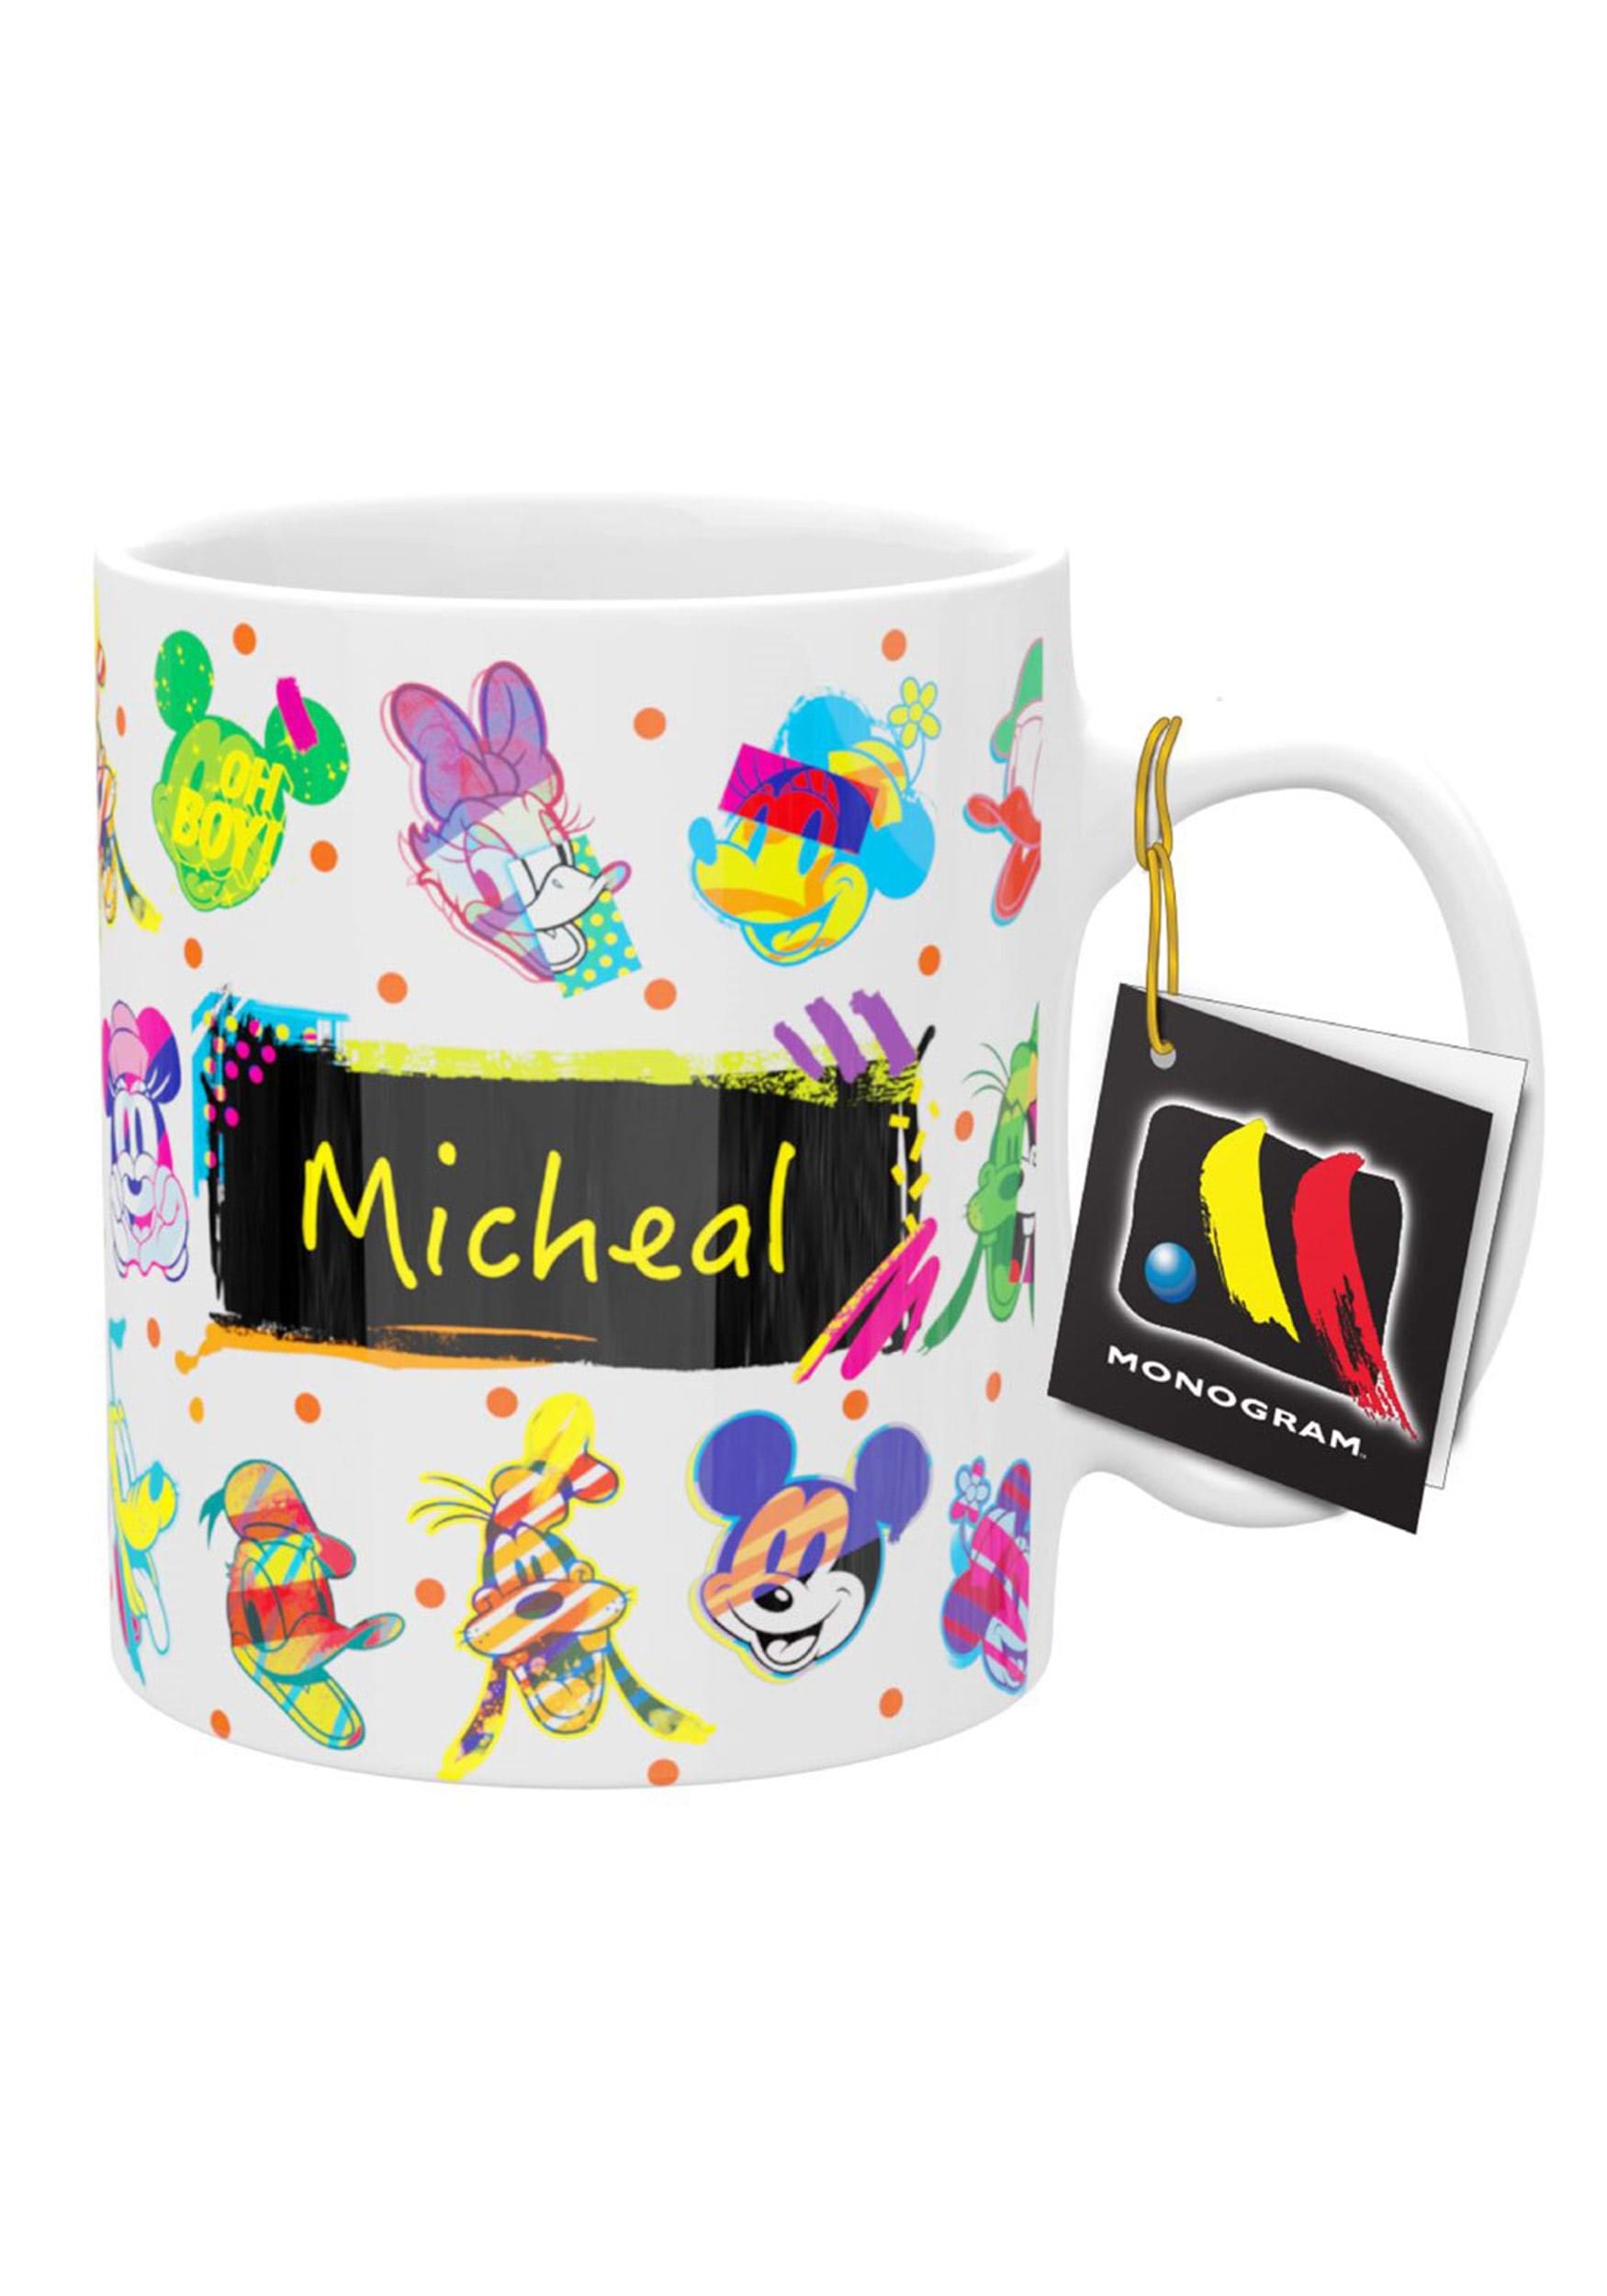 https://images.fun.com/products/80282/2-1-209950/mickey-and-friends-personalized-chalkboard-mug-alt-1.jpg